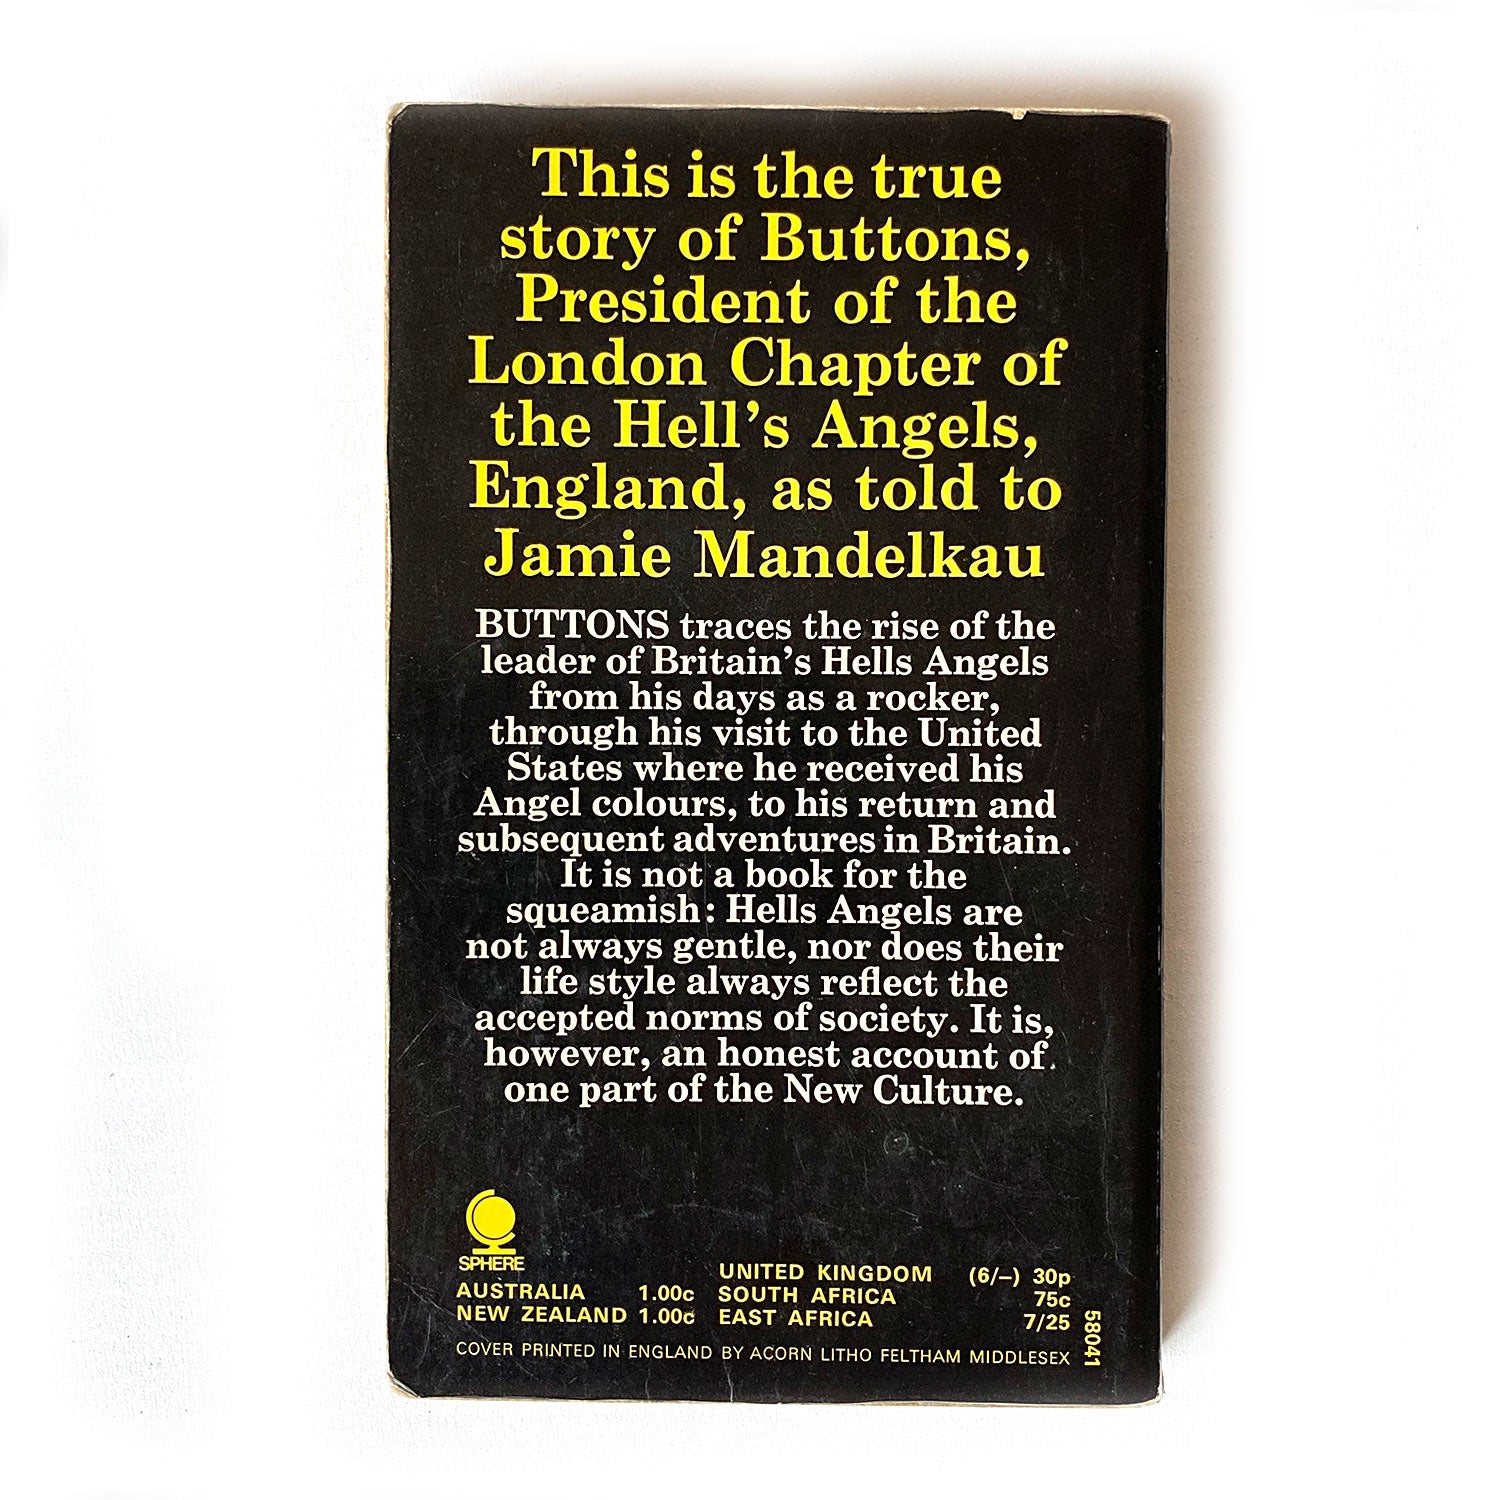 Buttons: The Making of a President by Jamie Mandelkau, First Edition Sphere paperback, 1971